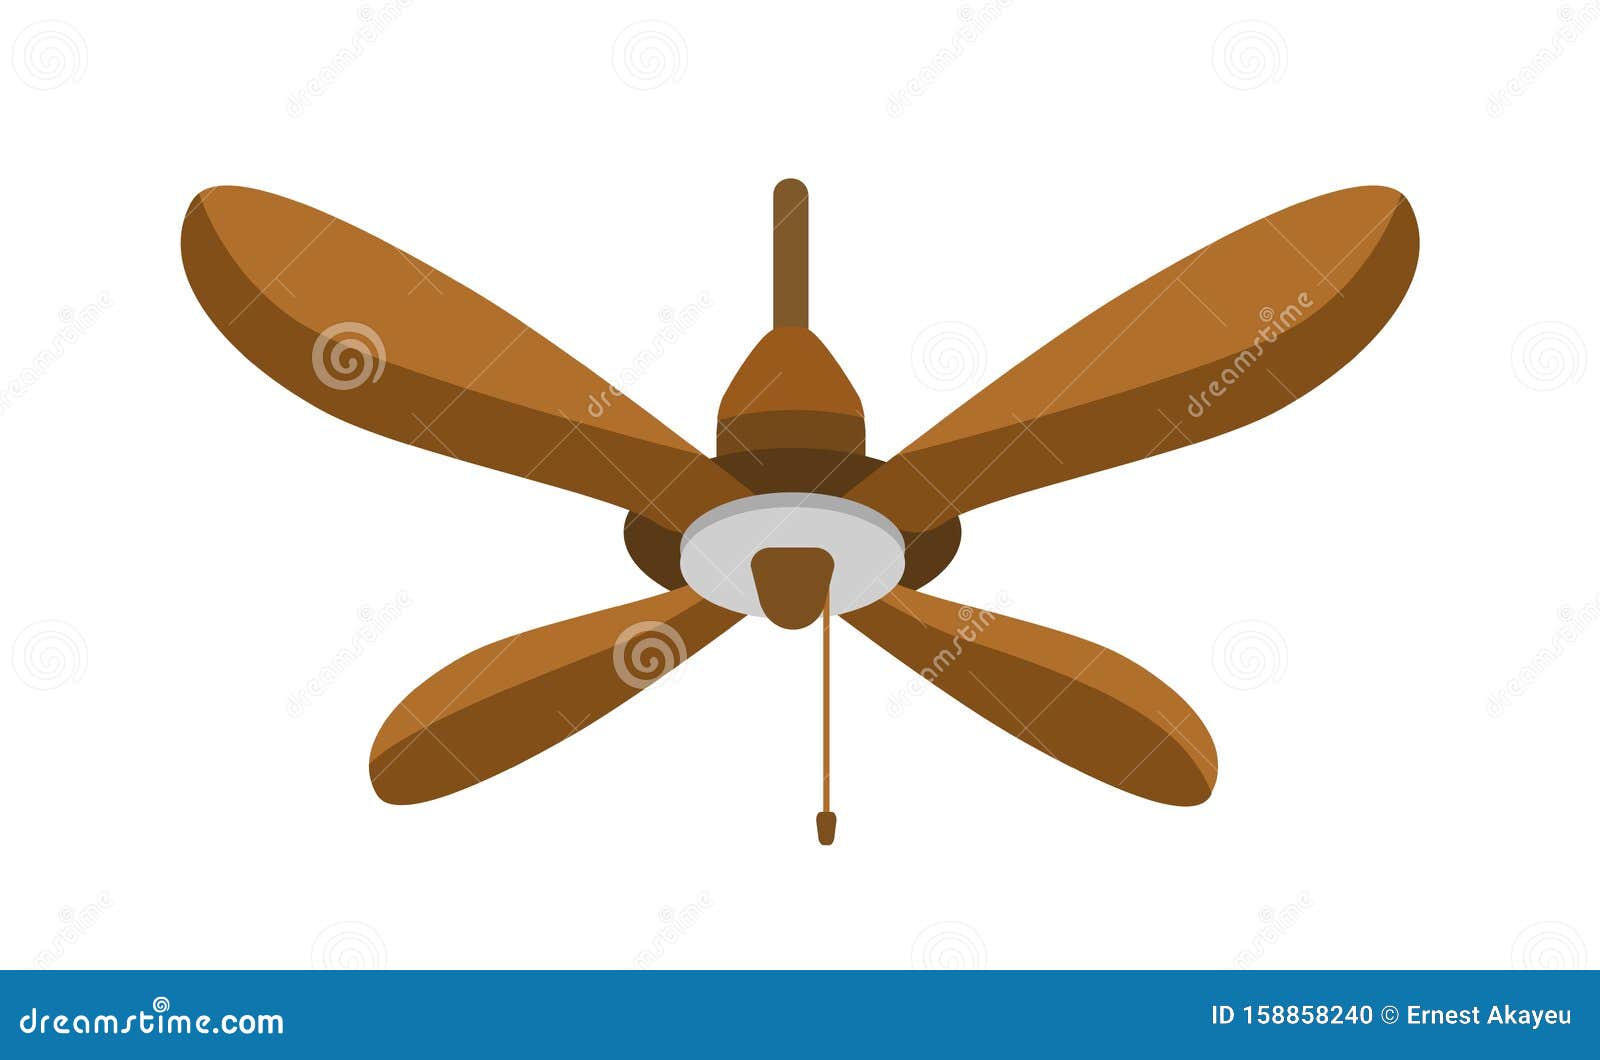 Ceiling Fan Flat Vector Illustration Hanging Wooden Spinning Propeller Summer Hot Air Cooling Tool Isolated On White Stock Vector Illustration Of Cooler